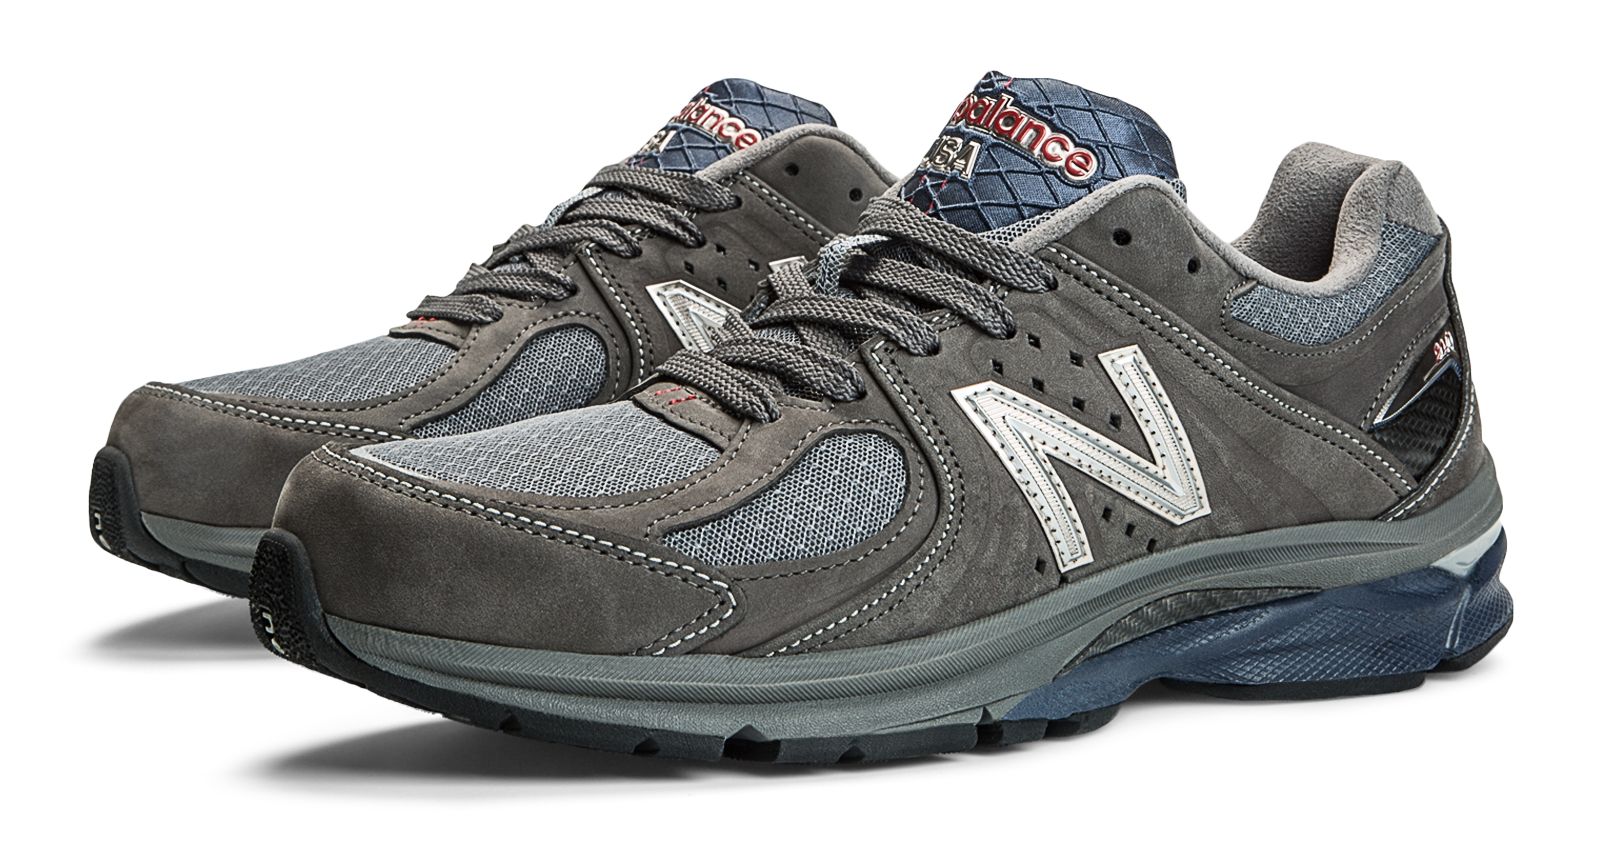 New Balance M2040 on Sale - Discounts Up to 27% Off on M2040GL1 at Joe's  New Balance Outlet